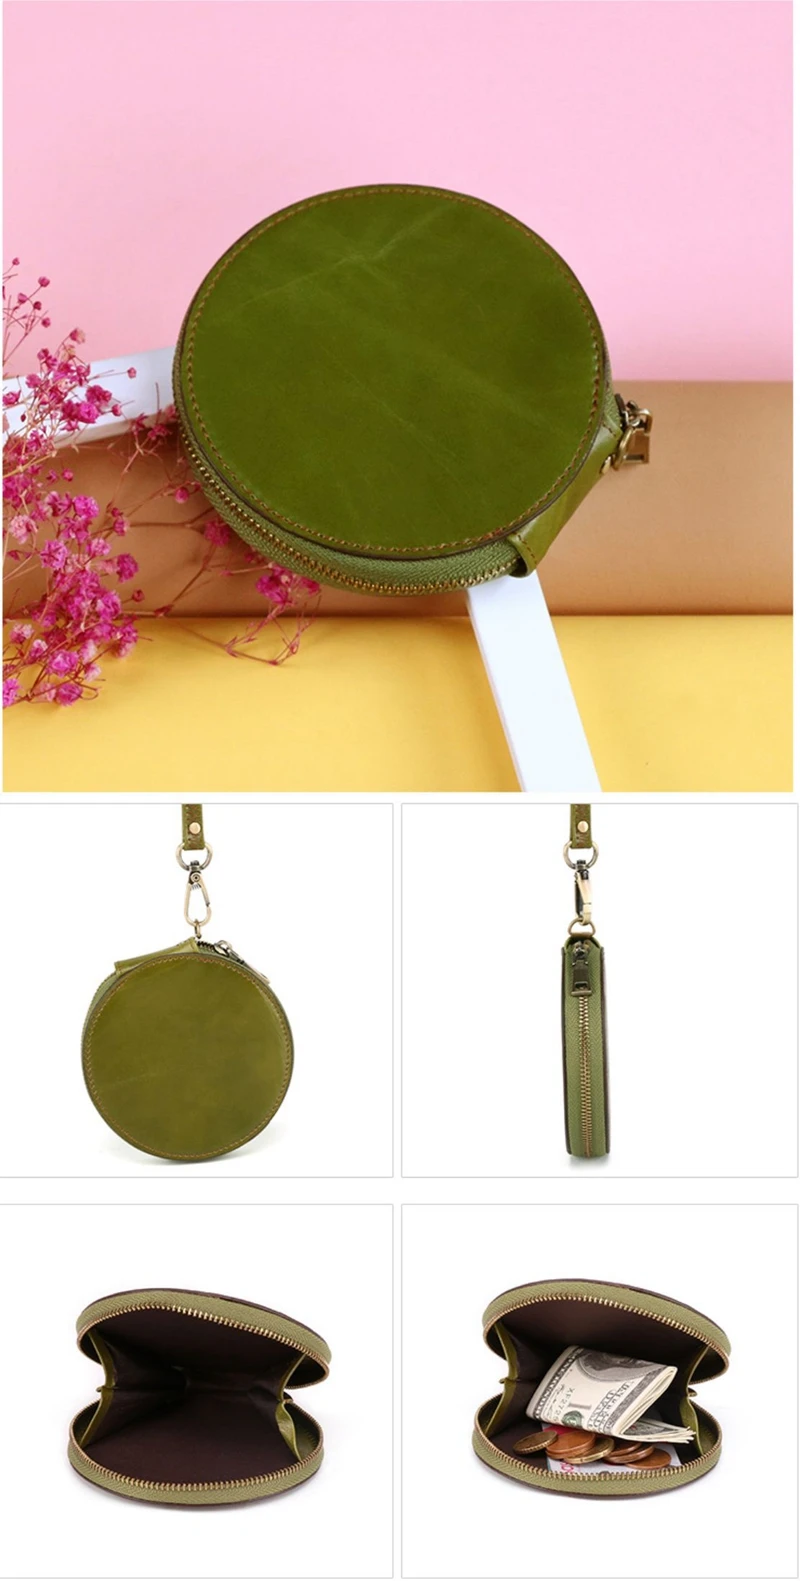 Genuine Leather Coin Purse Bag For Women Girl Short Zipper Round Small Money Pocket Bags Card Holder Wallet With Wraist Strap